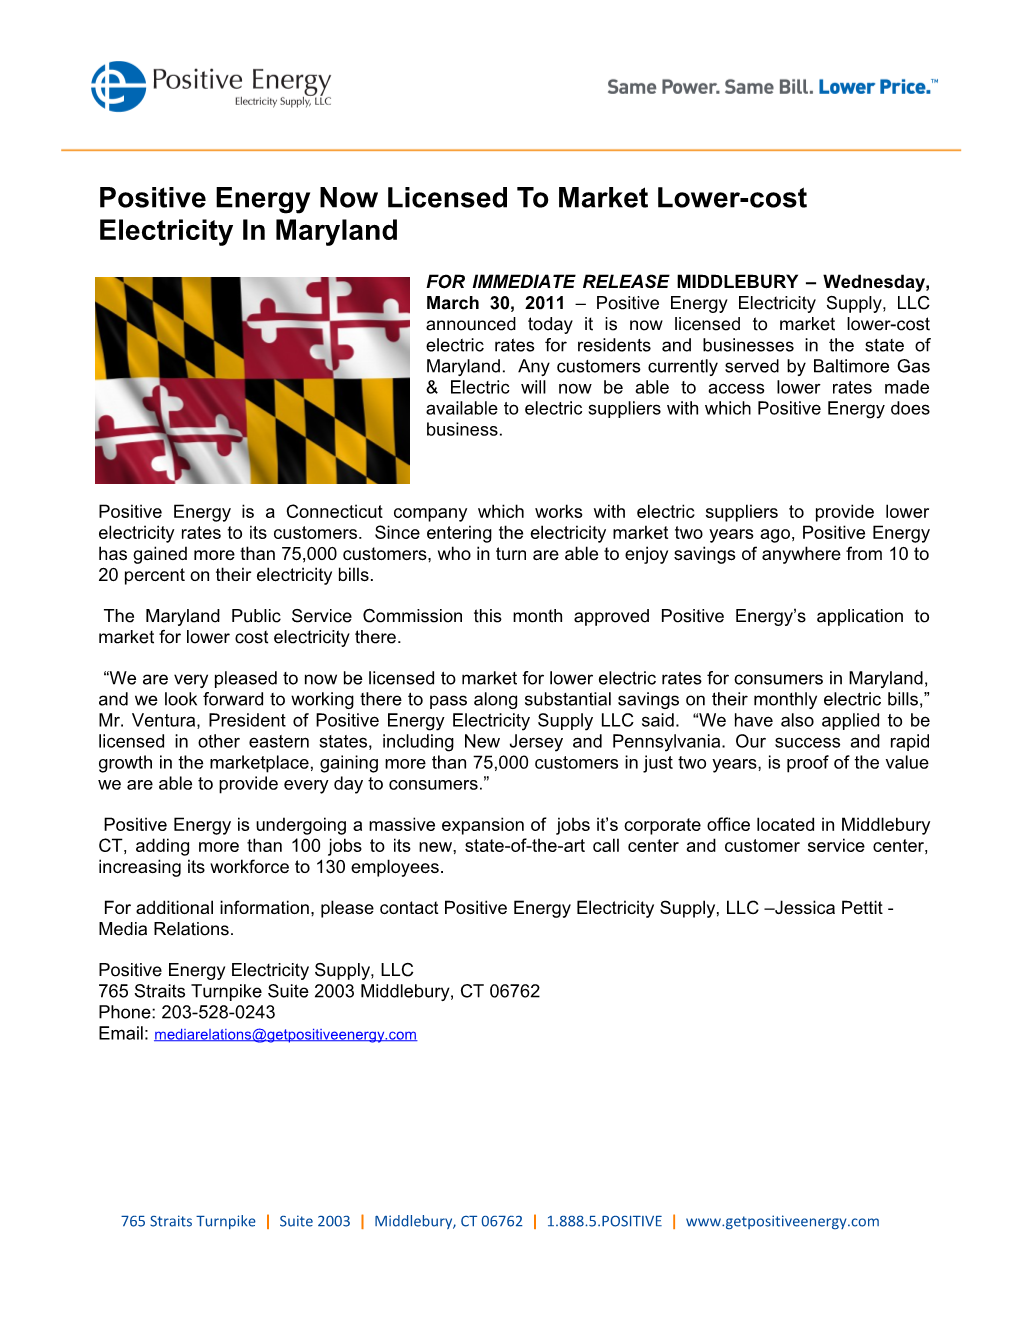 Positive Energy Now Licensed to Market Lower-Cost Electricity in Maryland